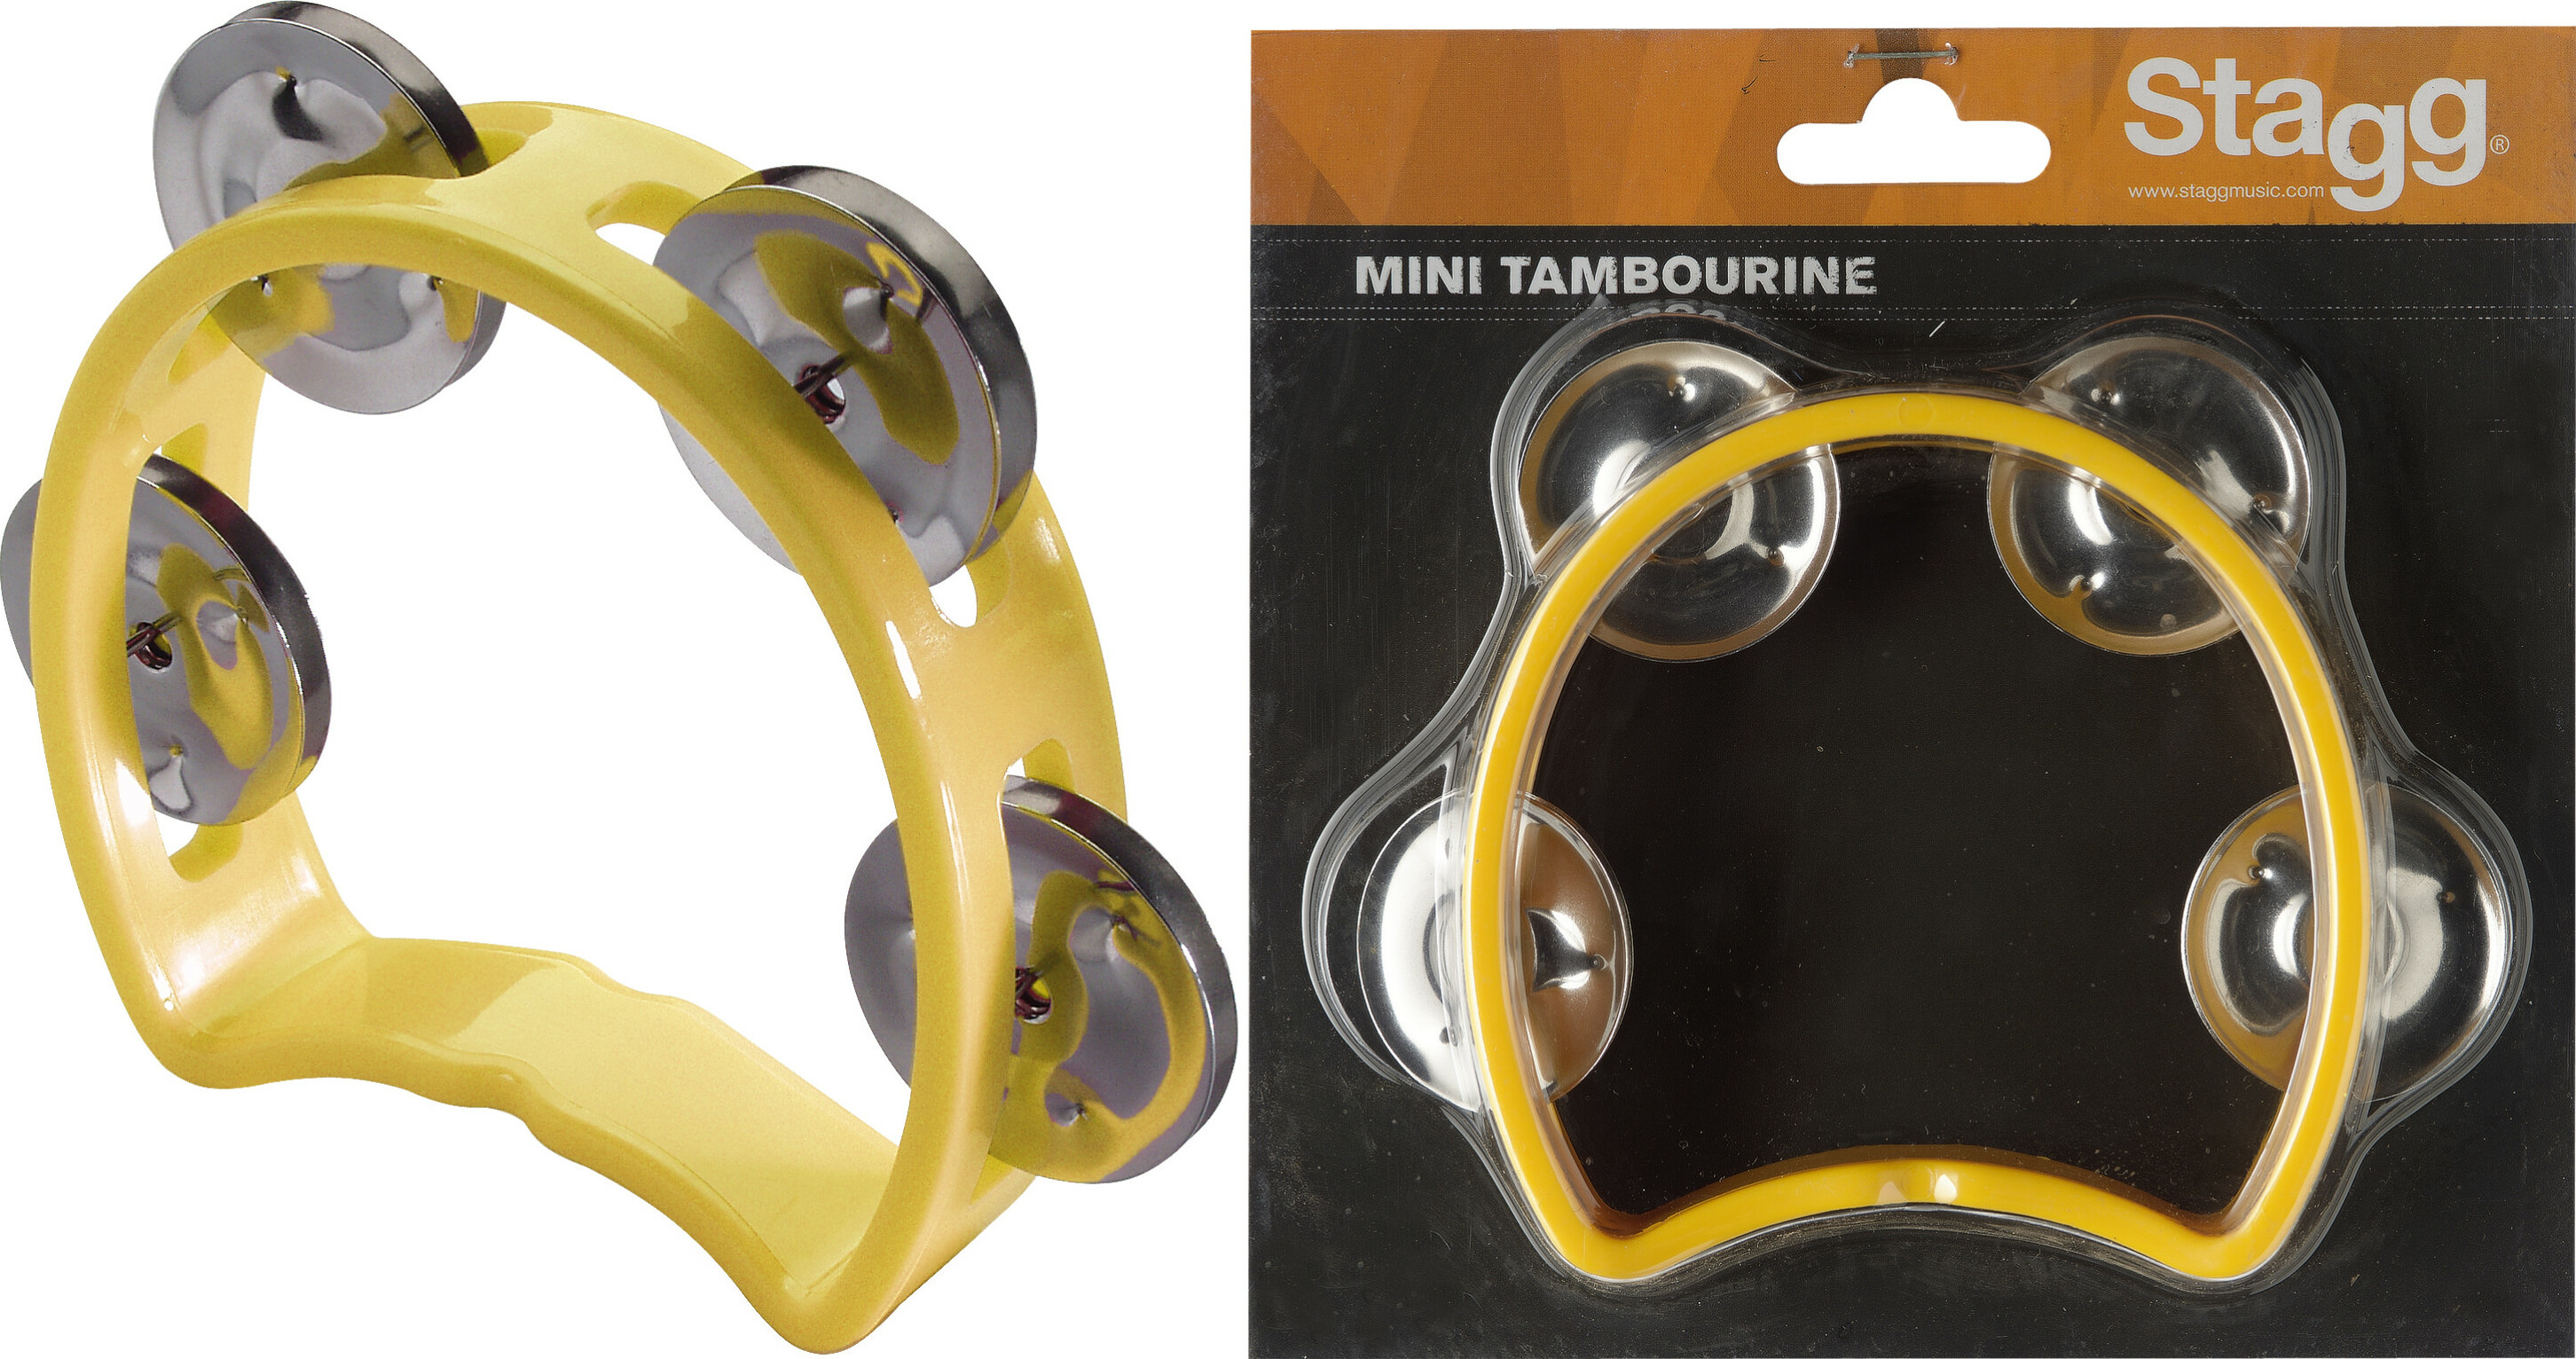 Stagg Tab-mini/yw Plastique 4 Cymbalettes Yellow - Shake percussions - Main picture